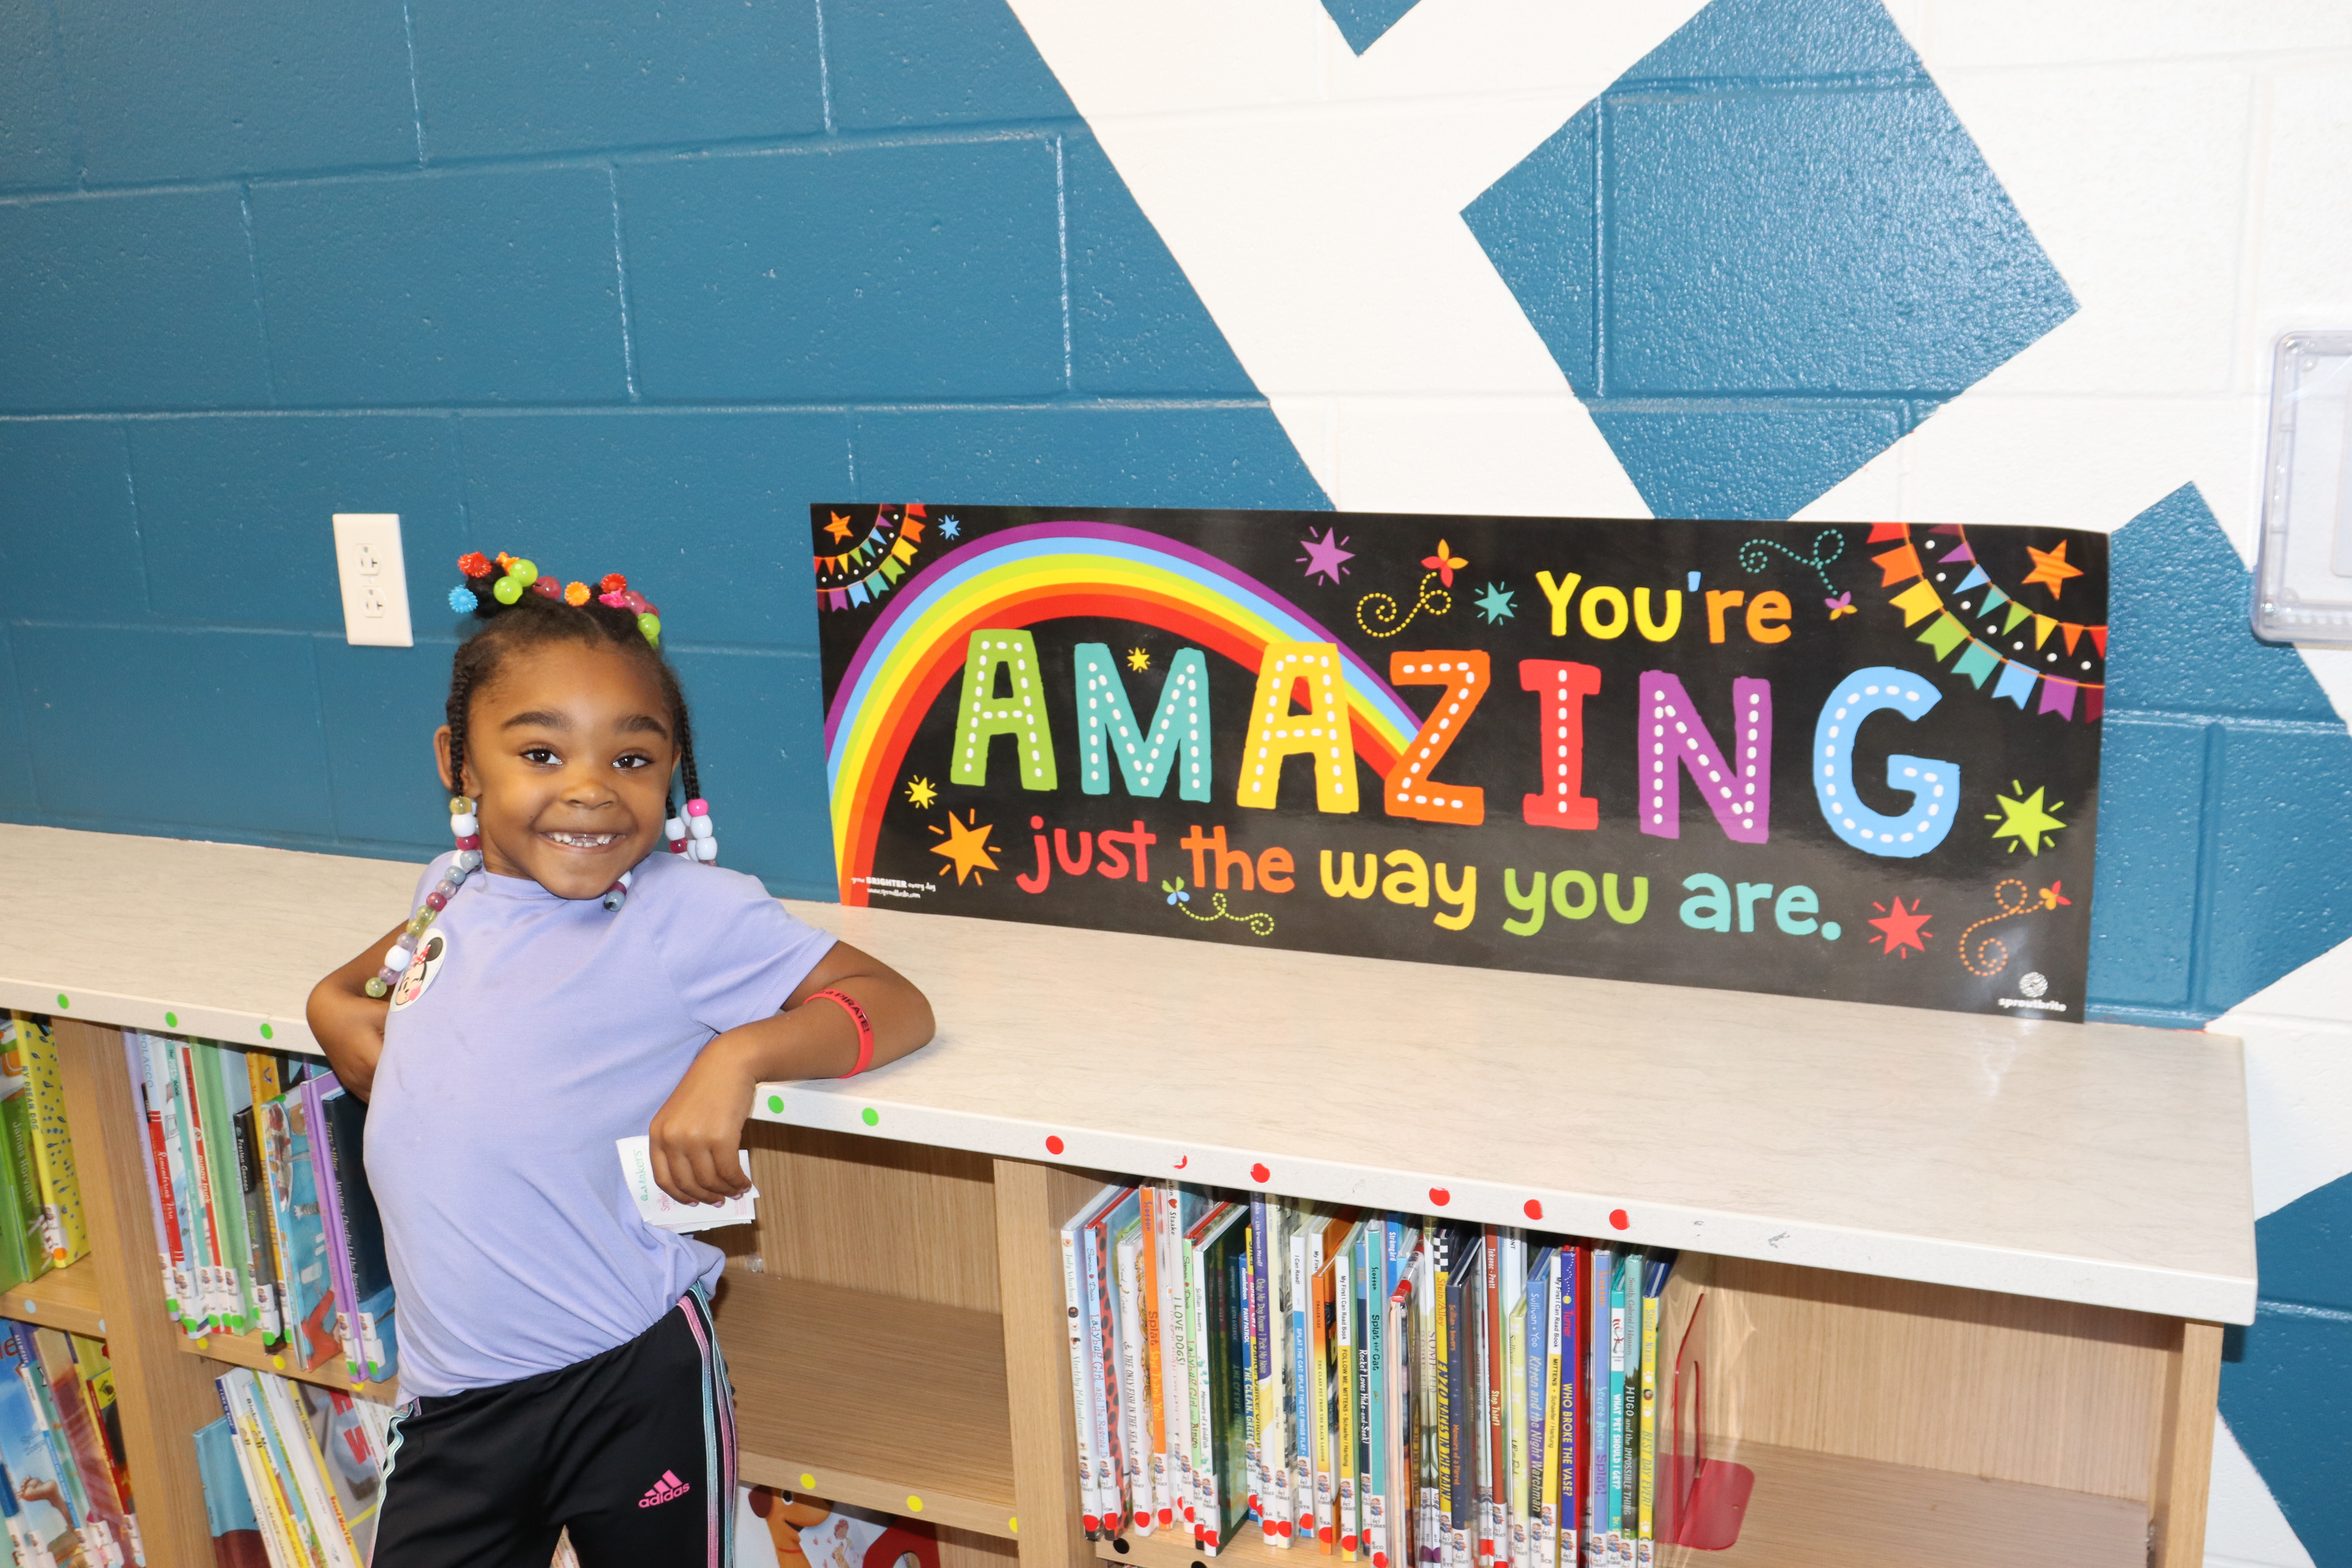 Student standing by sign that says you're amazing just the way you are.